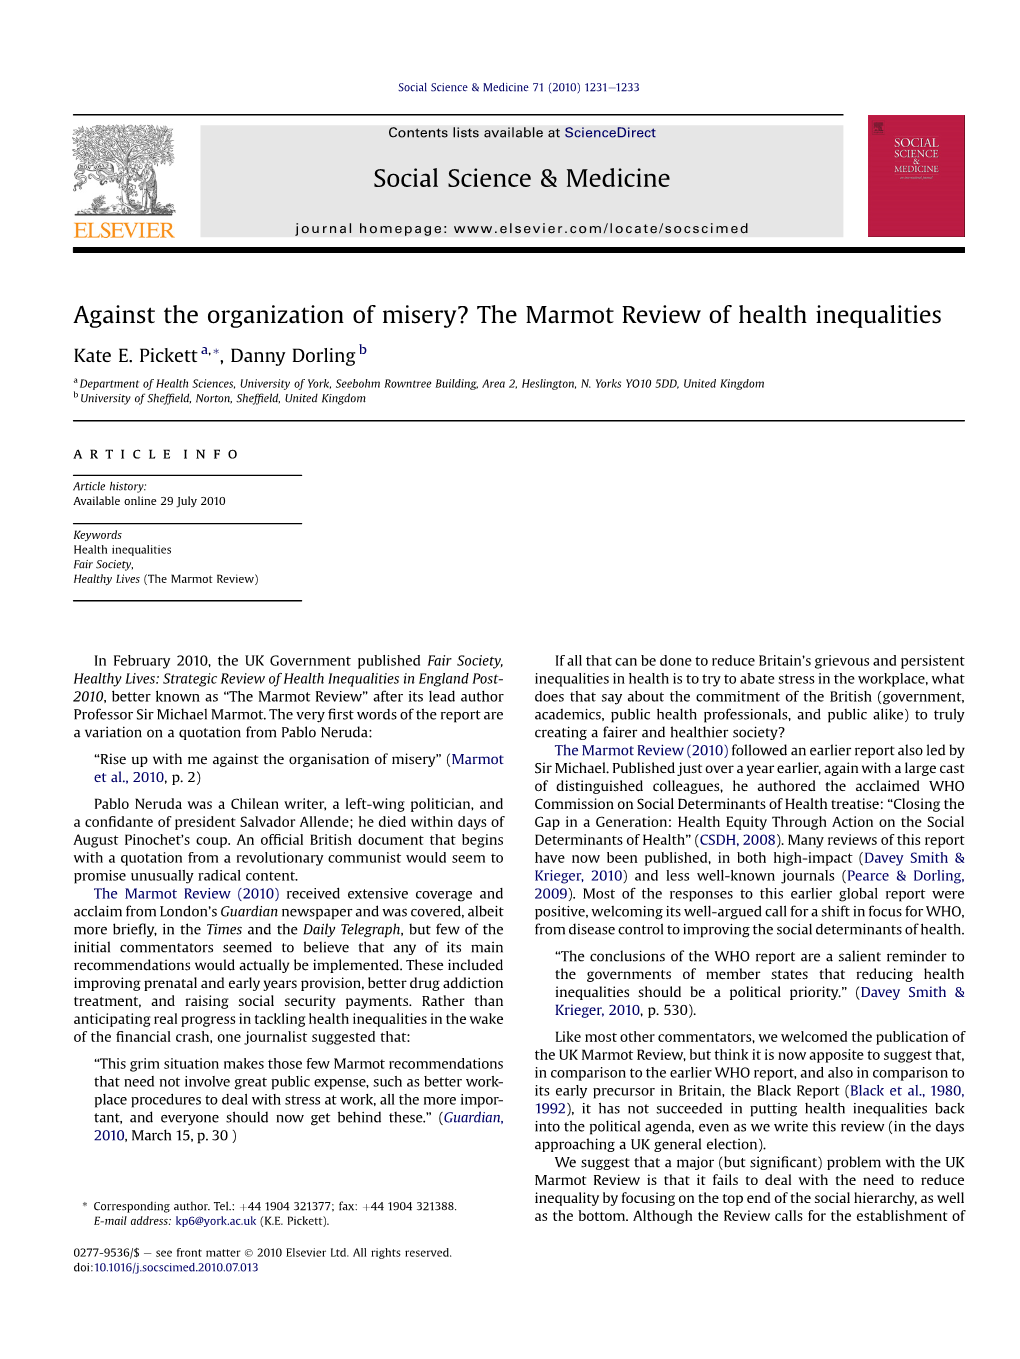 The Marmot Review of Health Inequalities